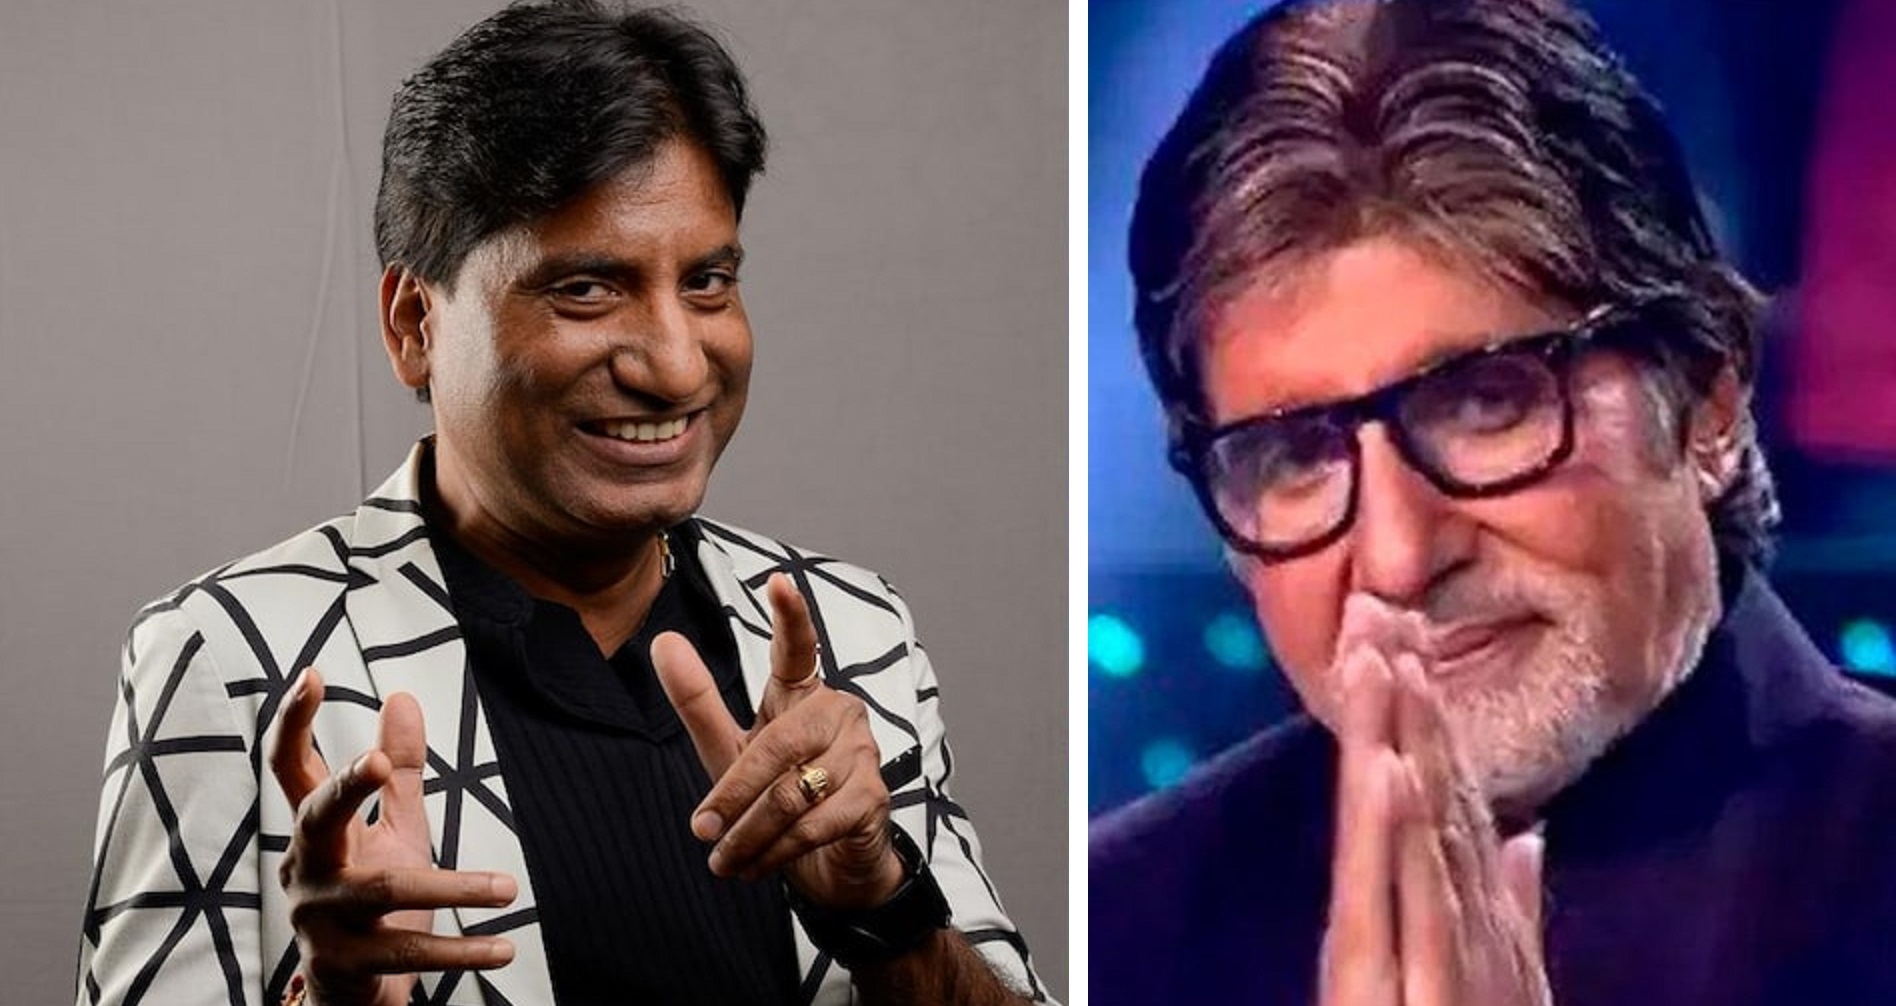 Amitabh Bachchan Pays Heartfelt Tribute To Raju Srivastava, Reveals He Sent A Note For The Comedian